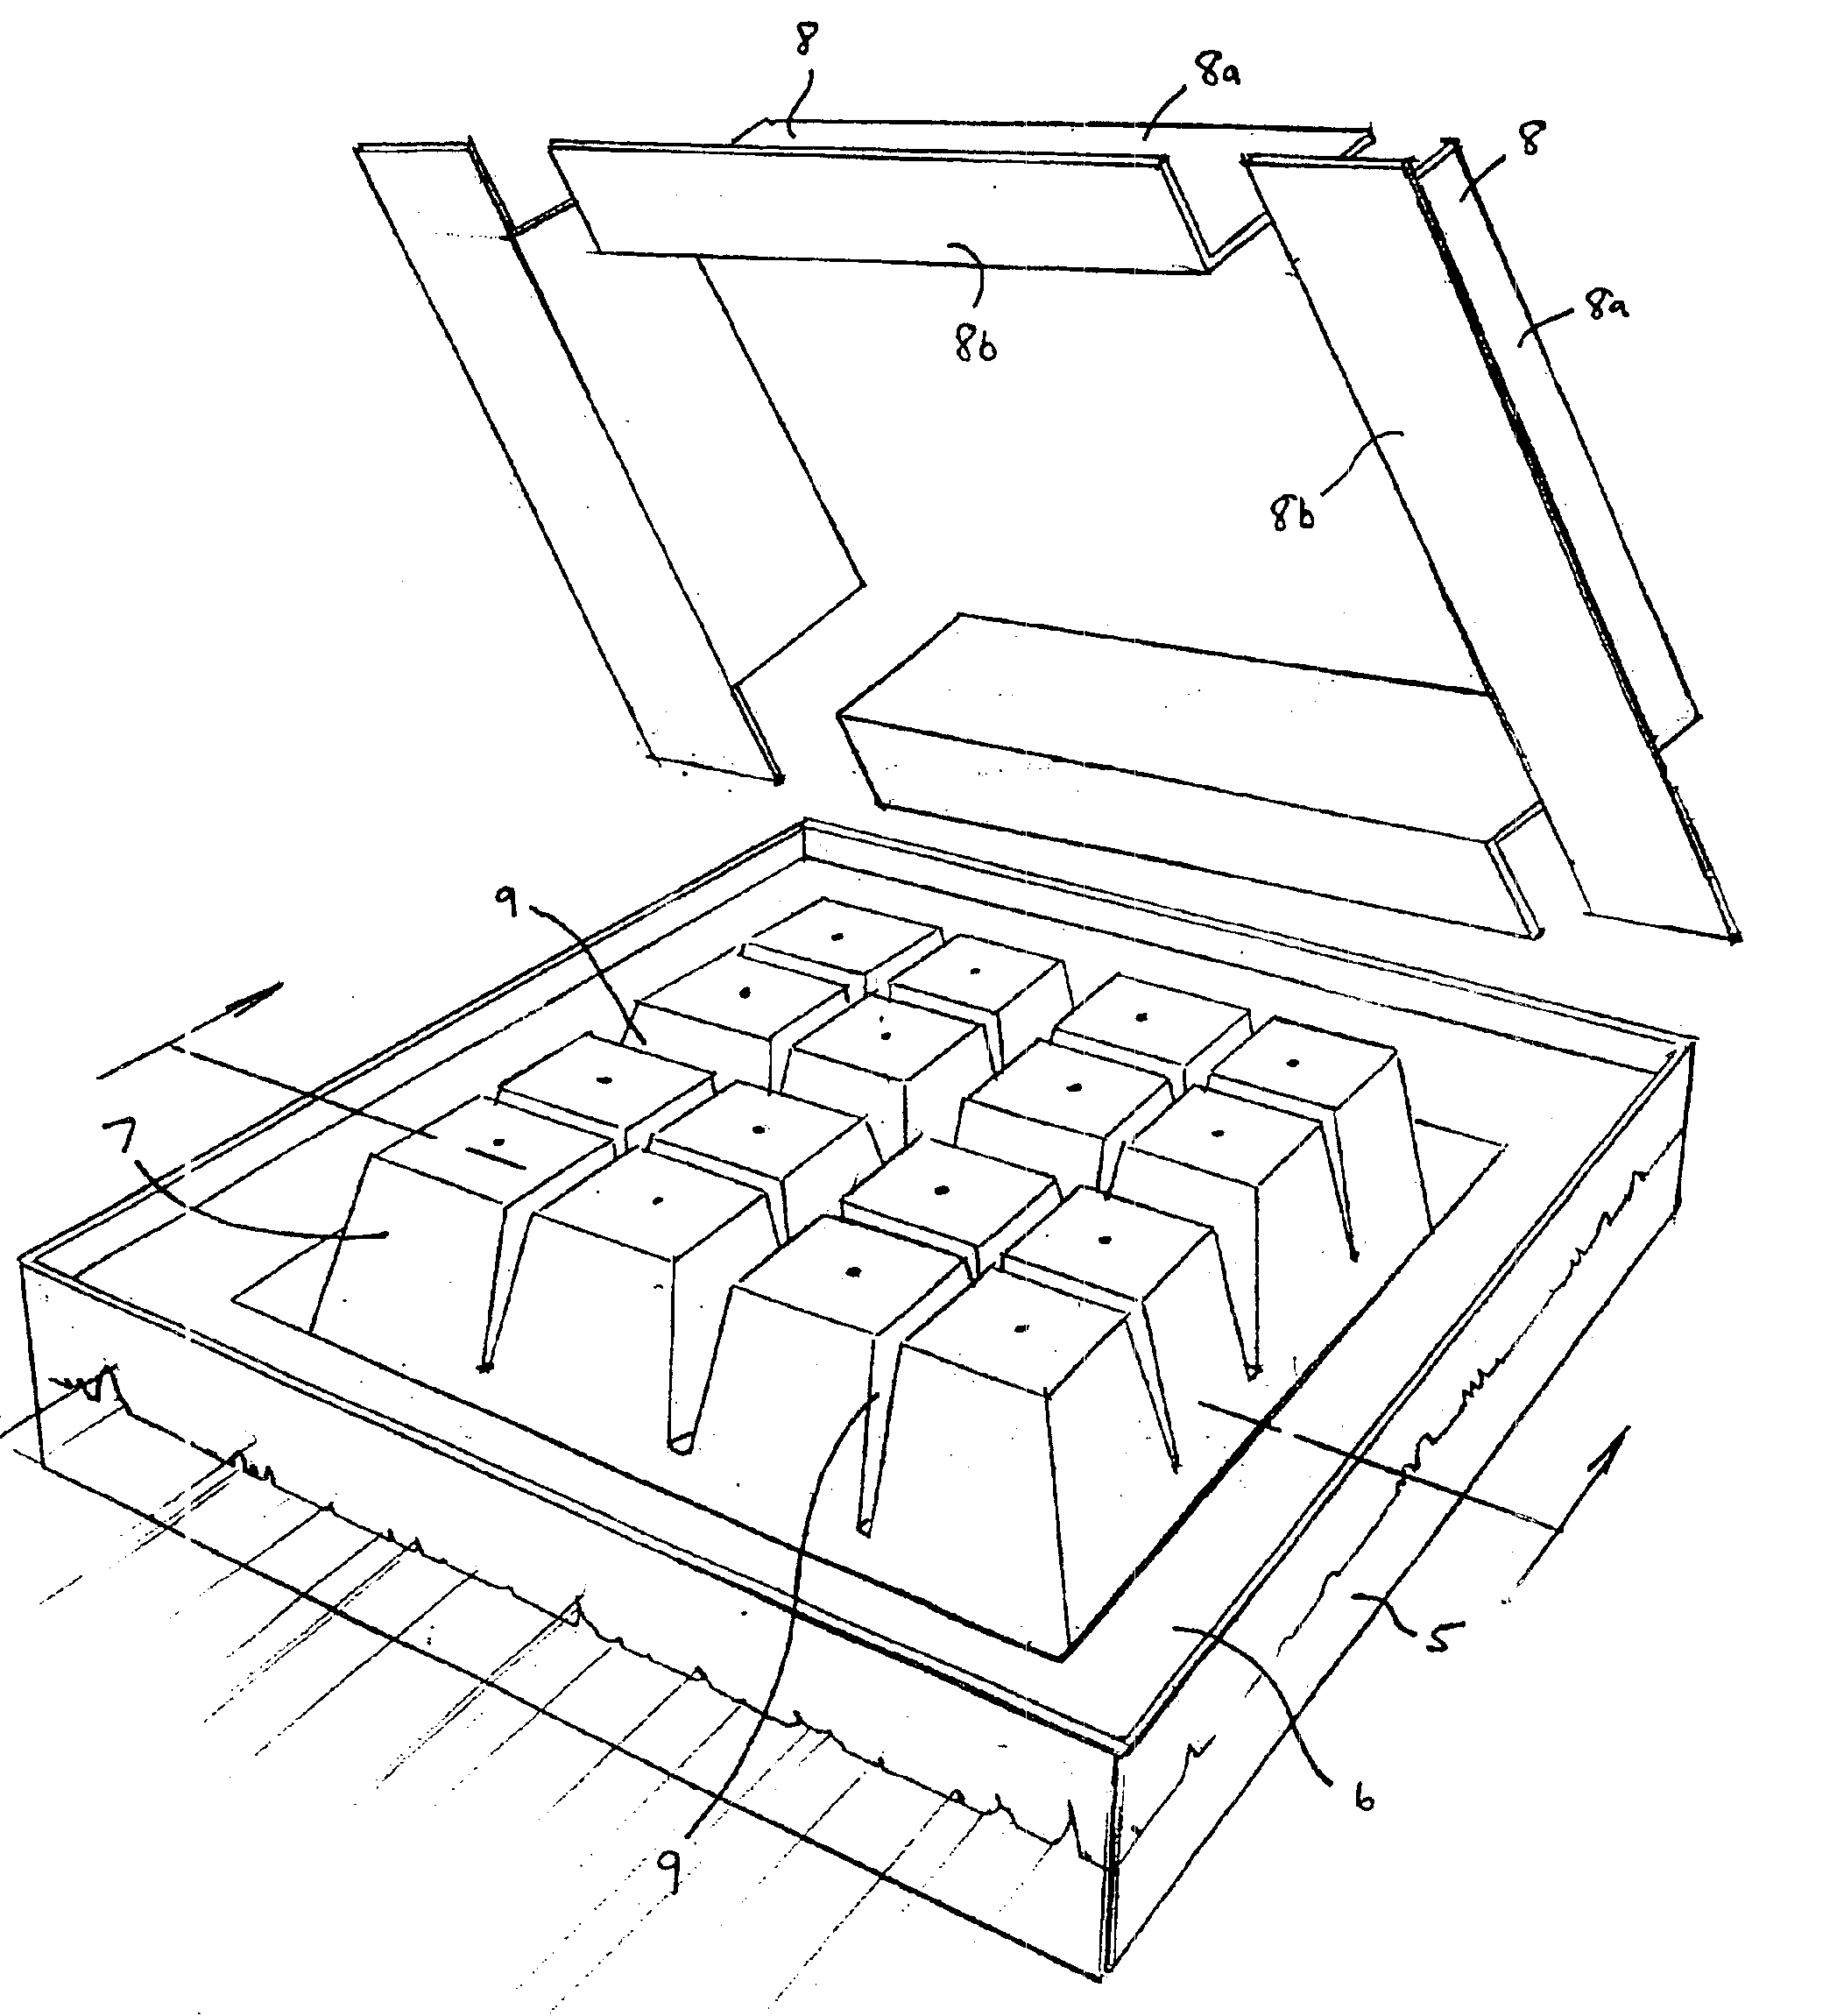 Technique and platform for fabricating a variable-buoyancy structure